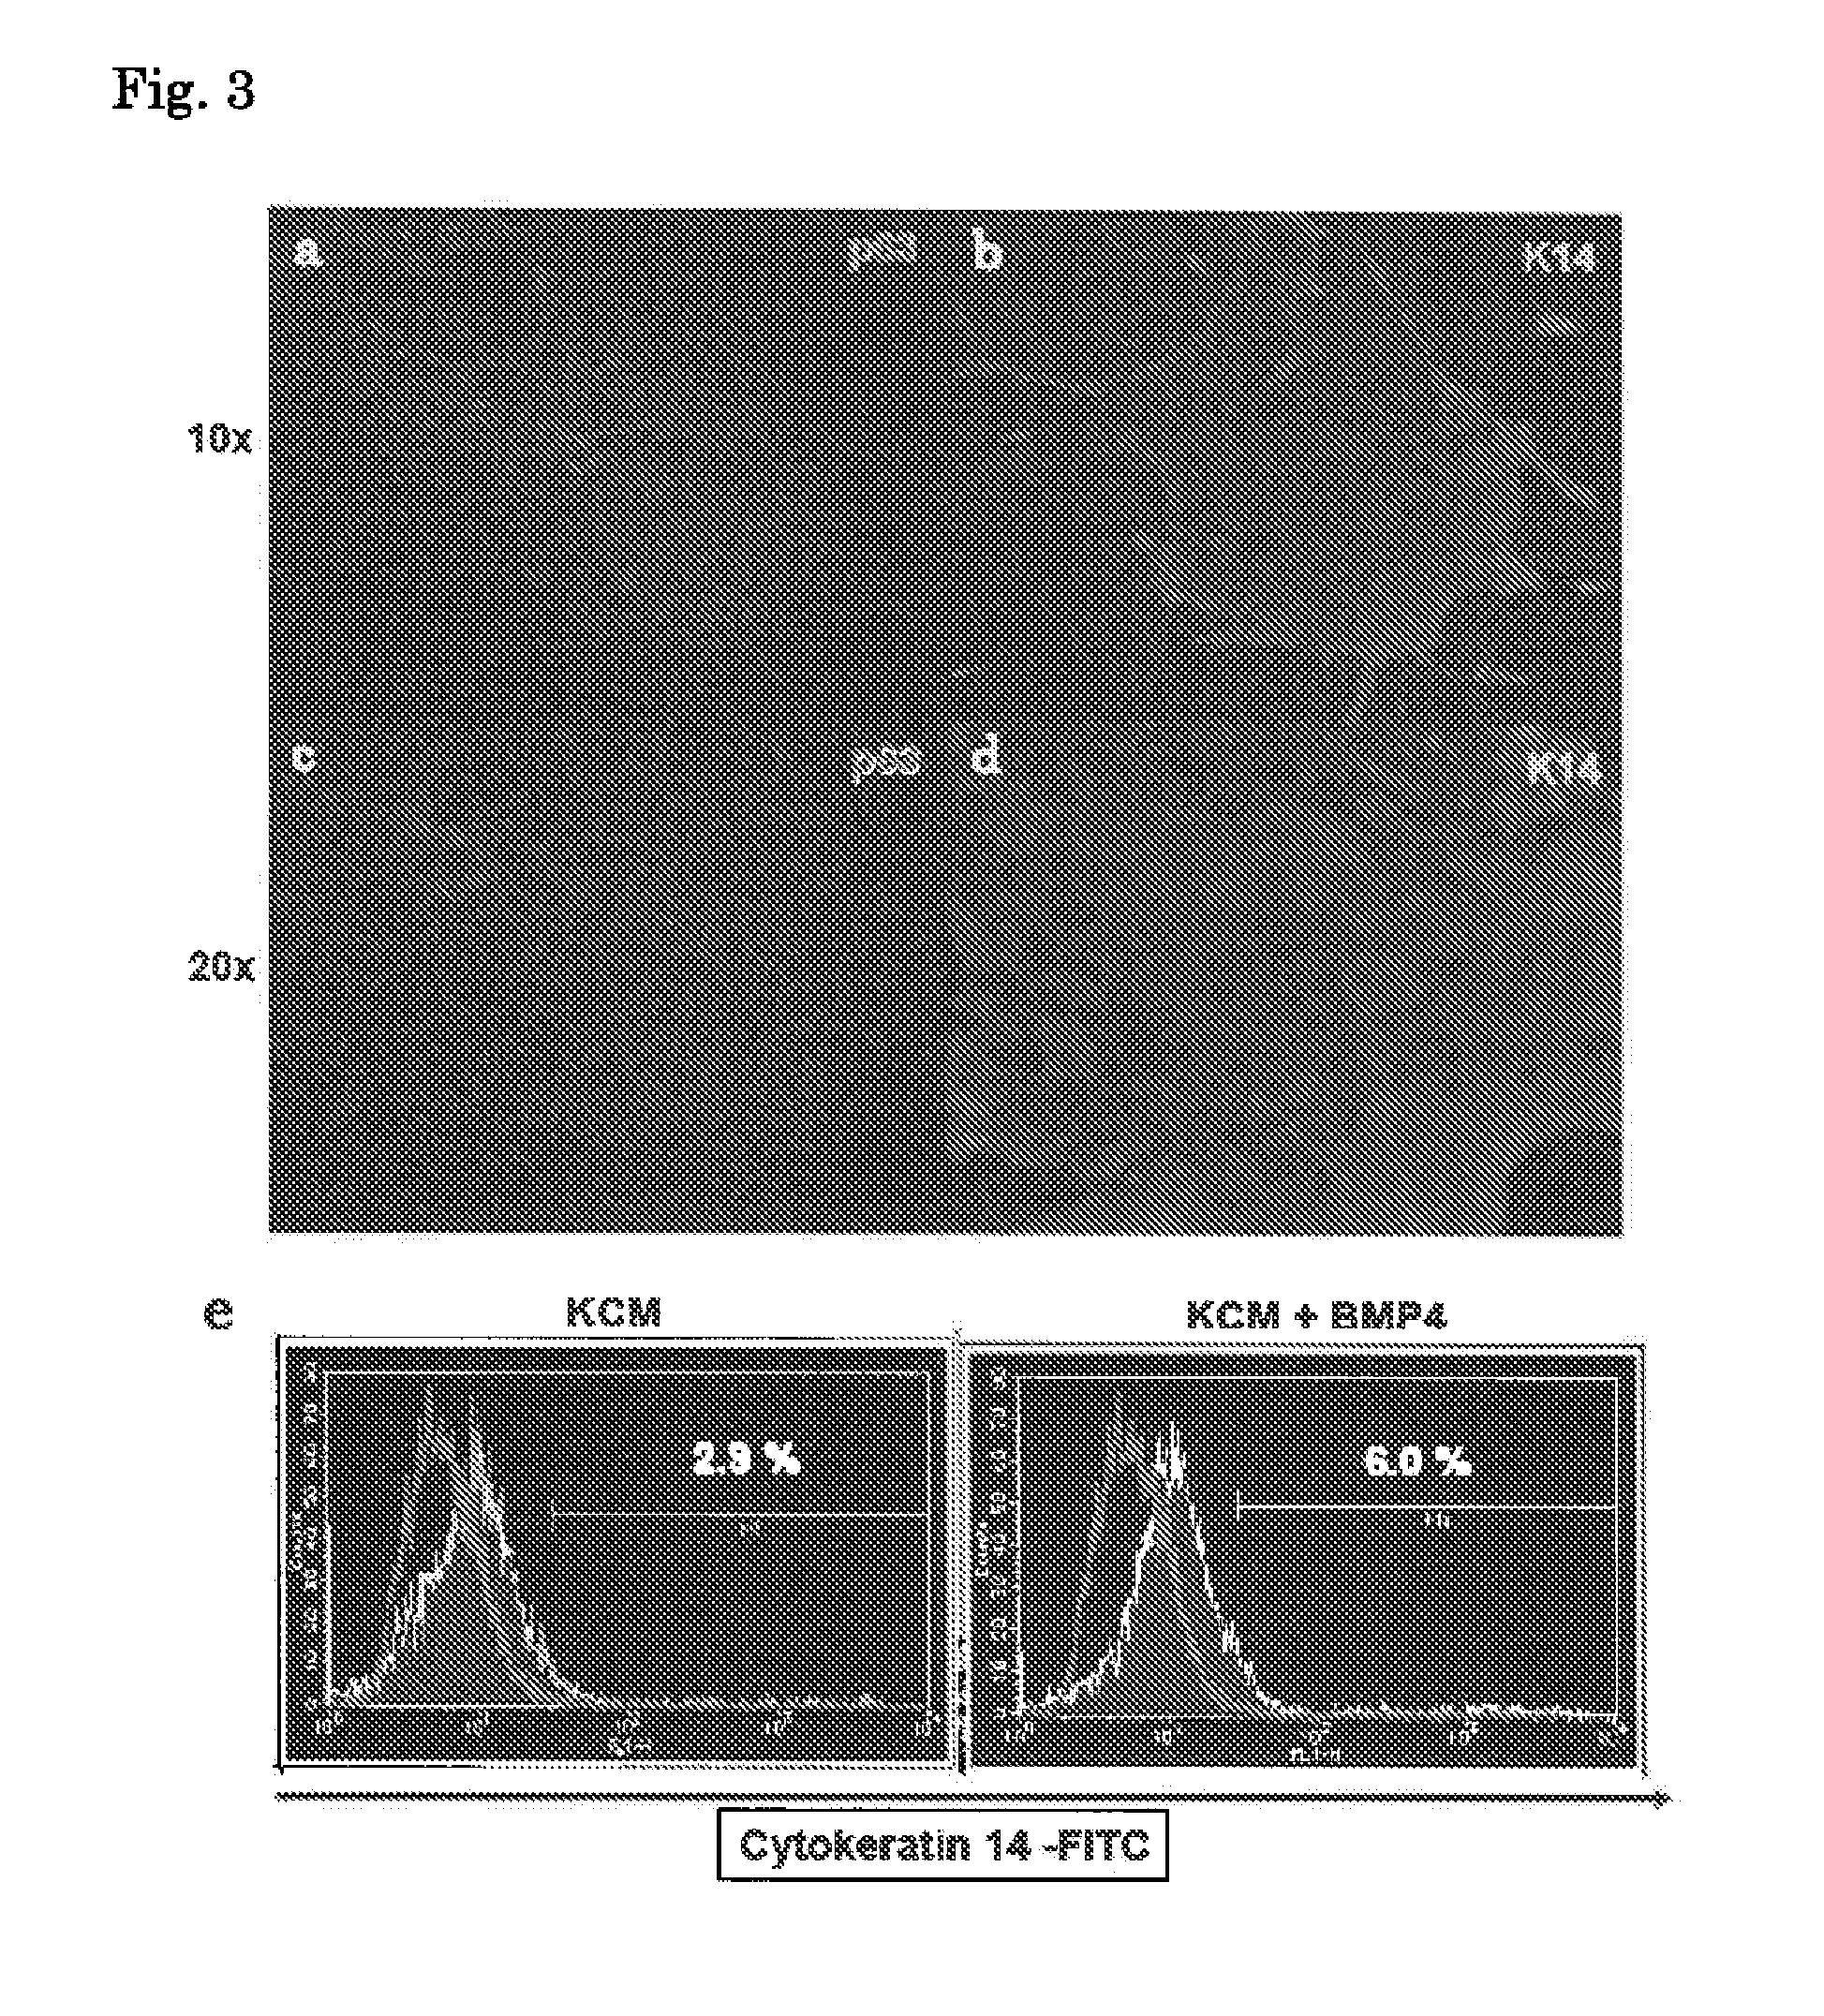 Method for inducing differentiation into epithelial progenitor cell/stem cell population and corneal epithelial cell population from induced pluripotent stem cells